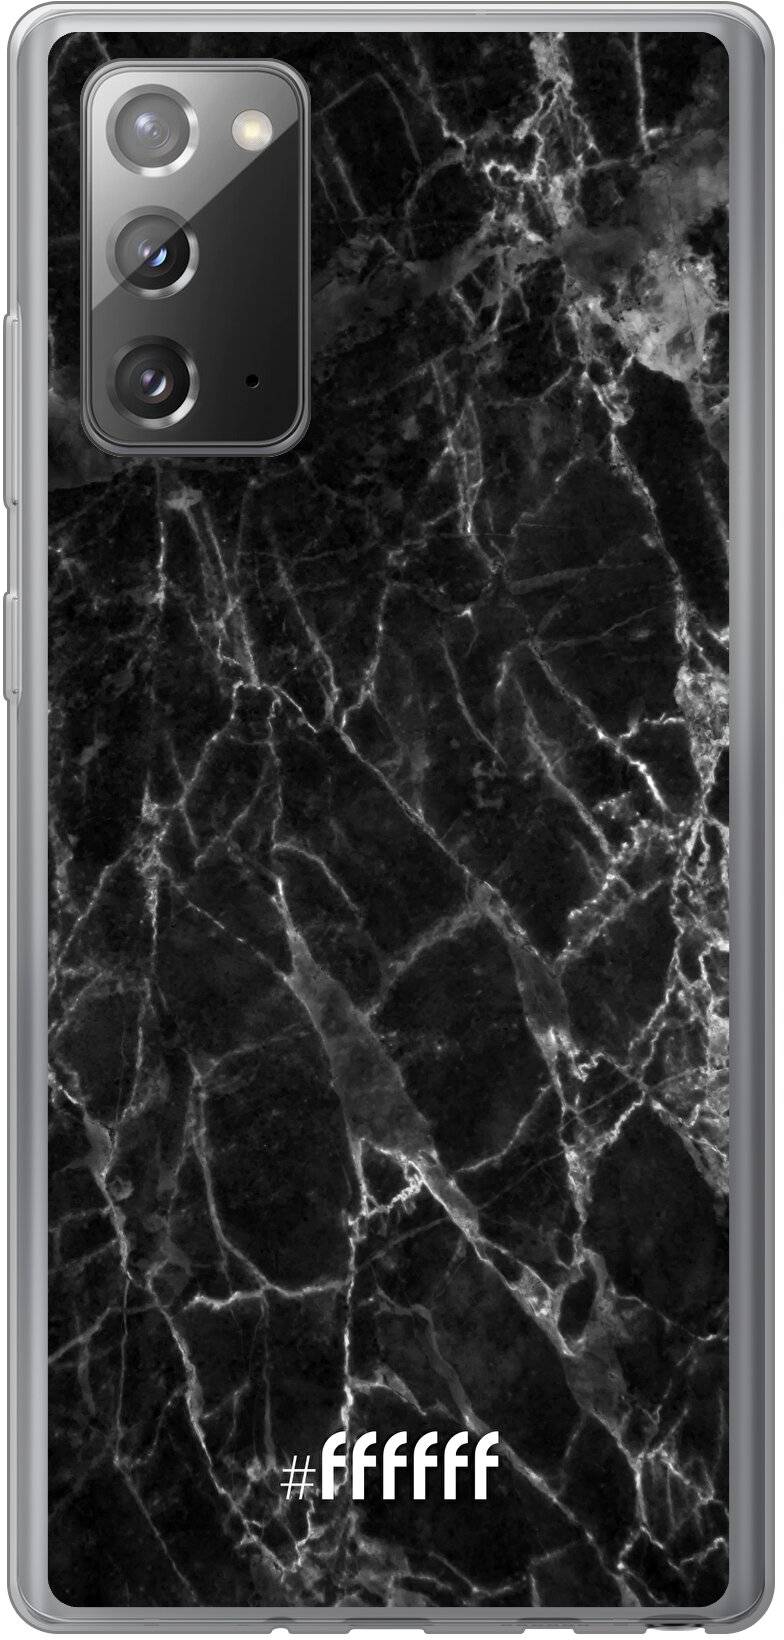 Shattered Marble Galaxy Note 20